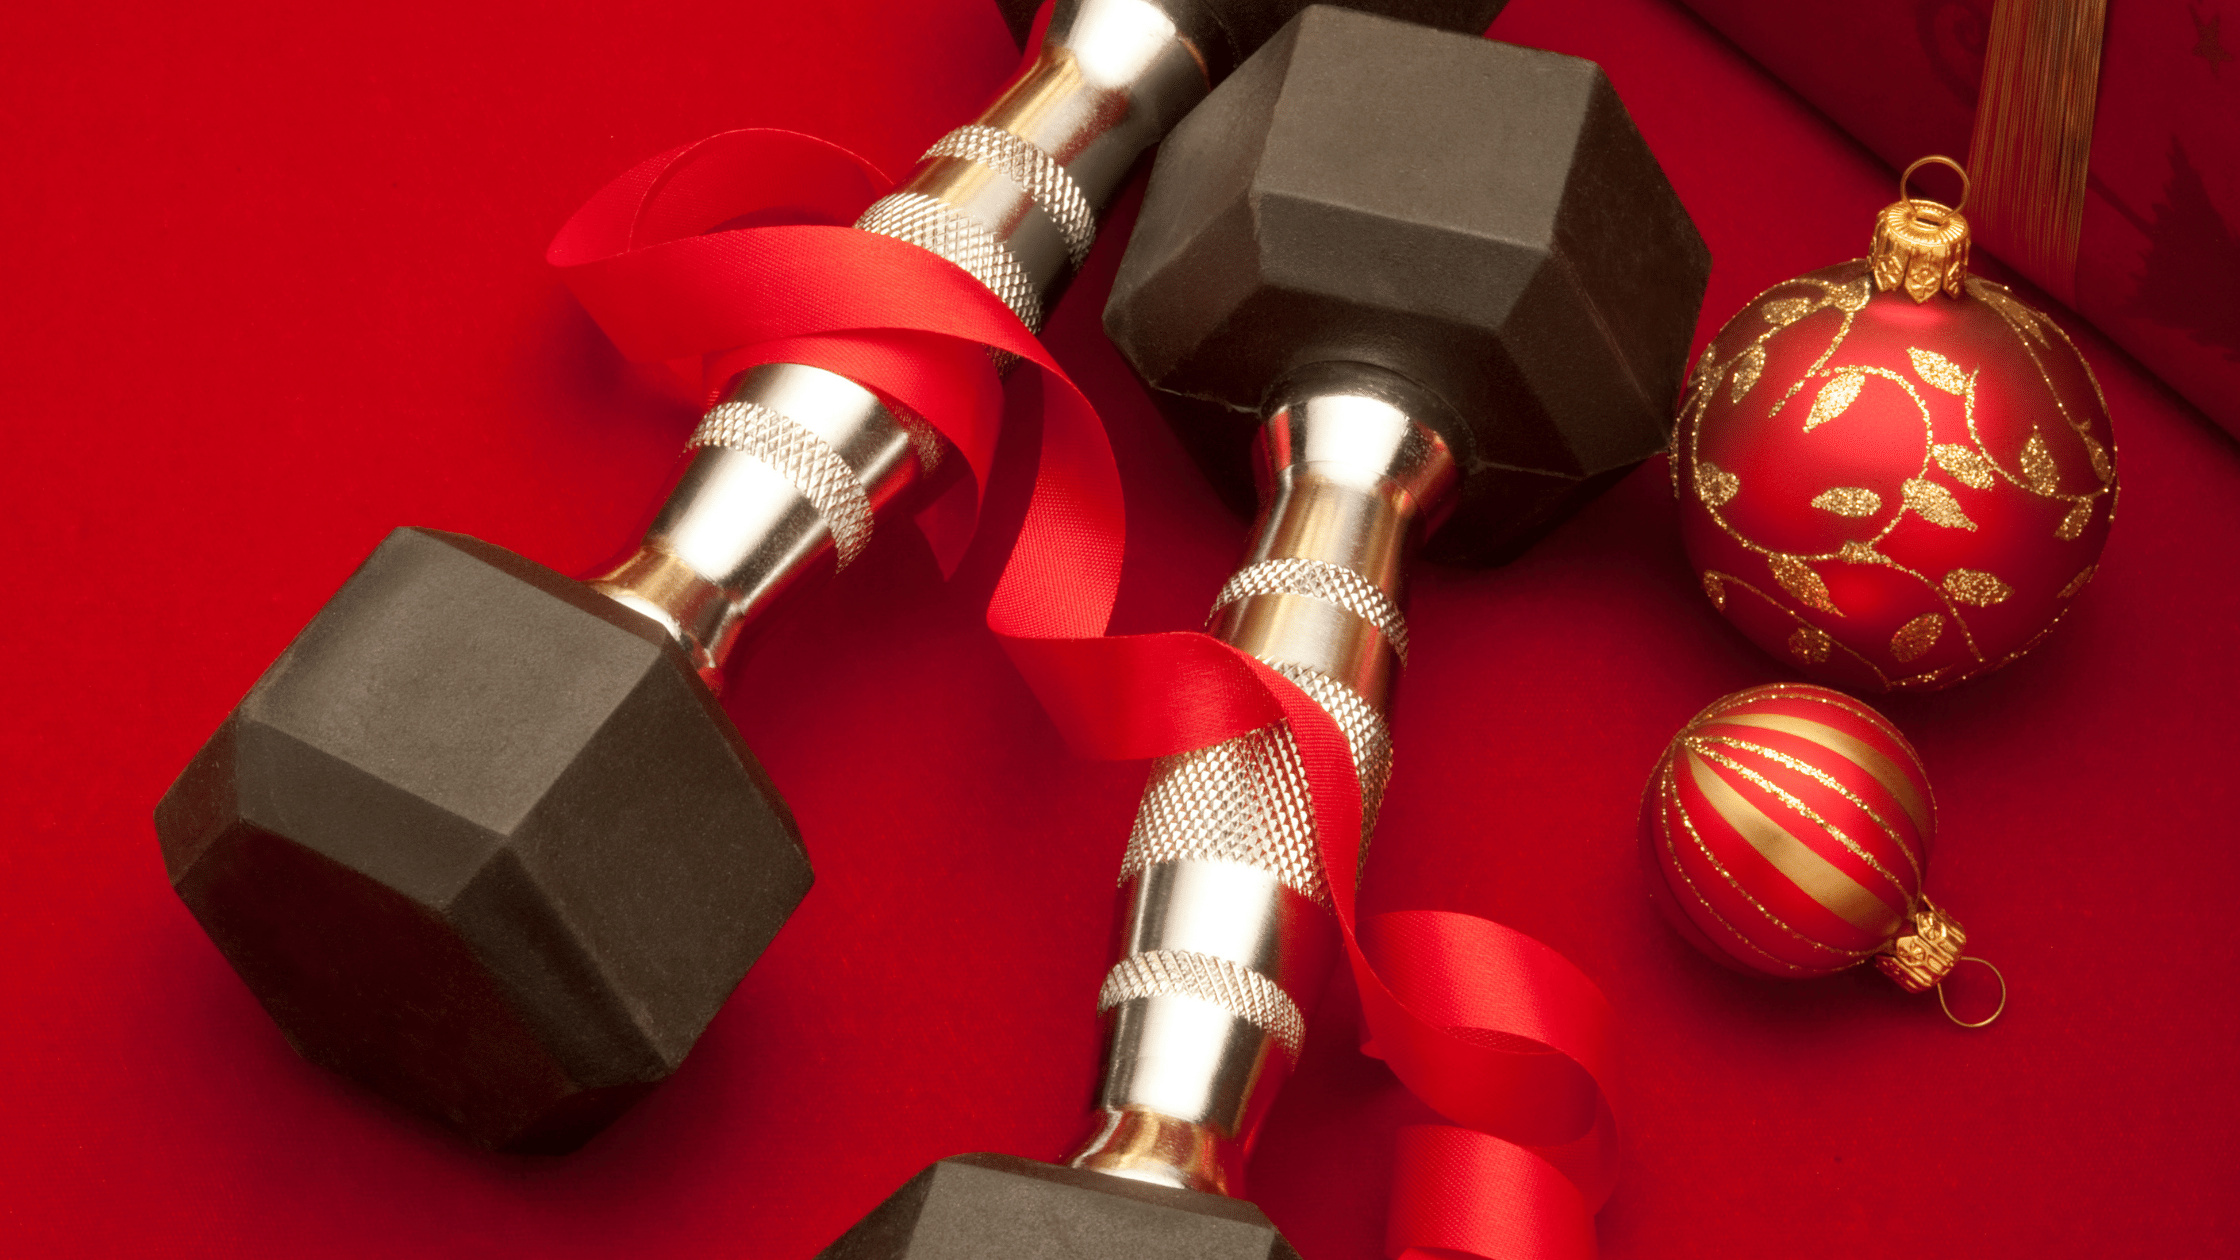 fitness connection christmas hours